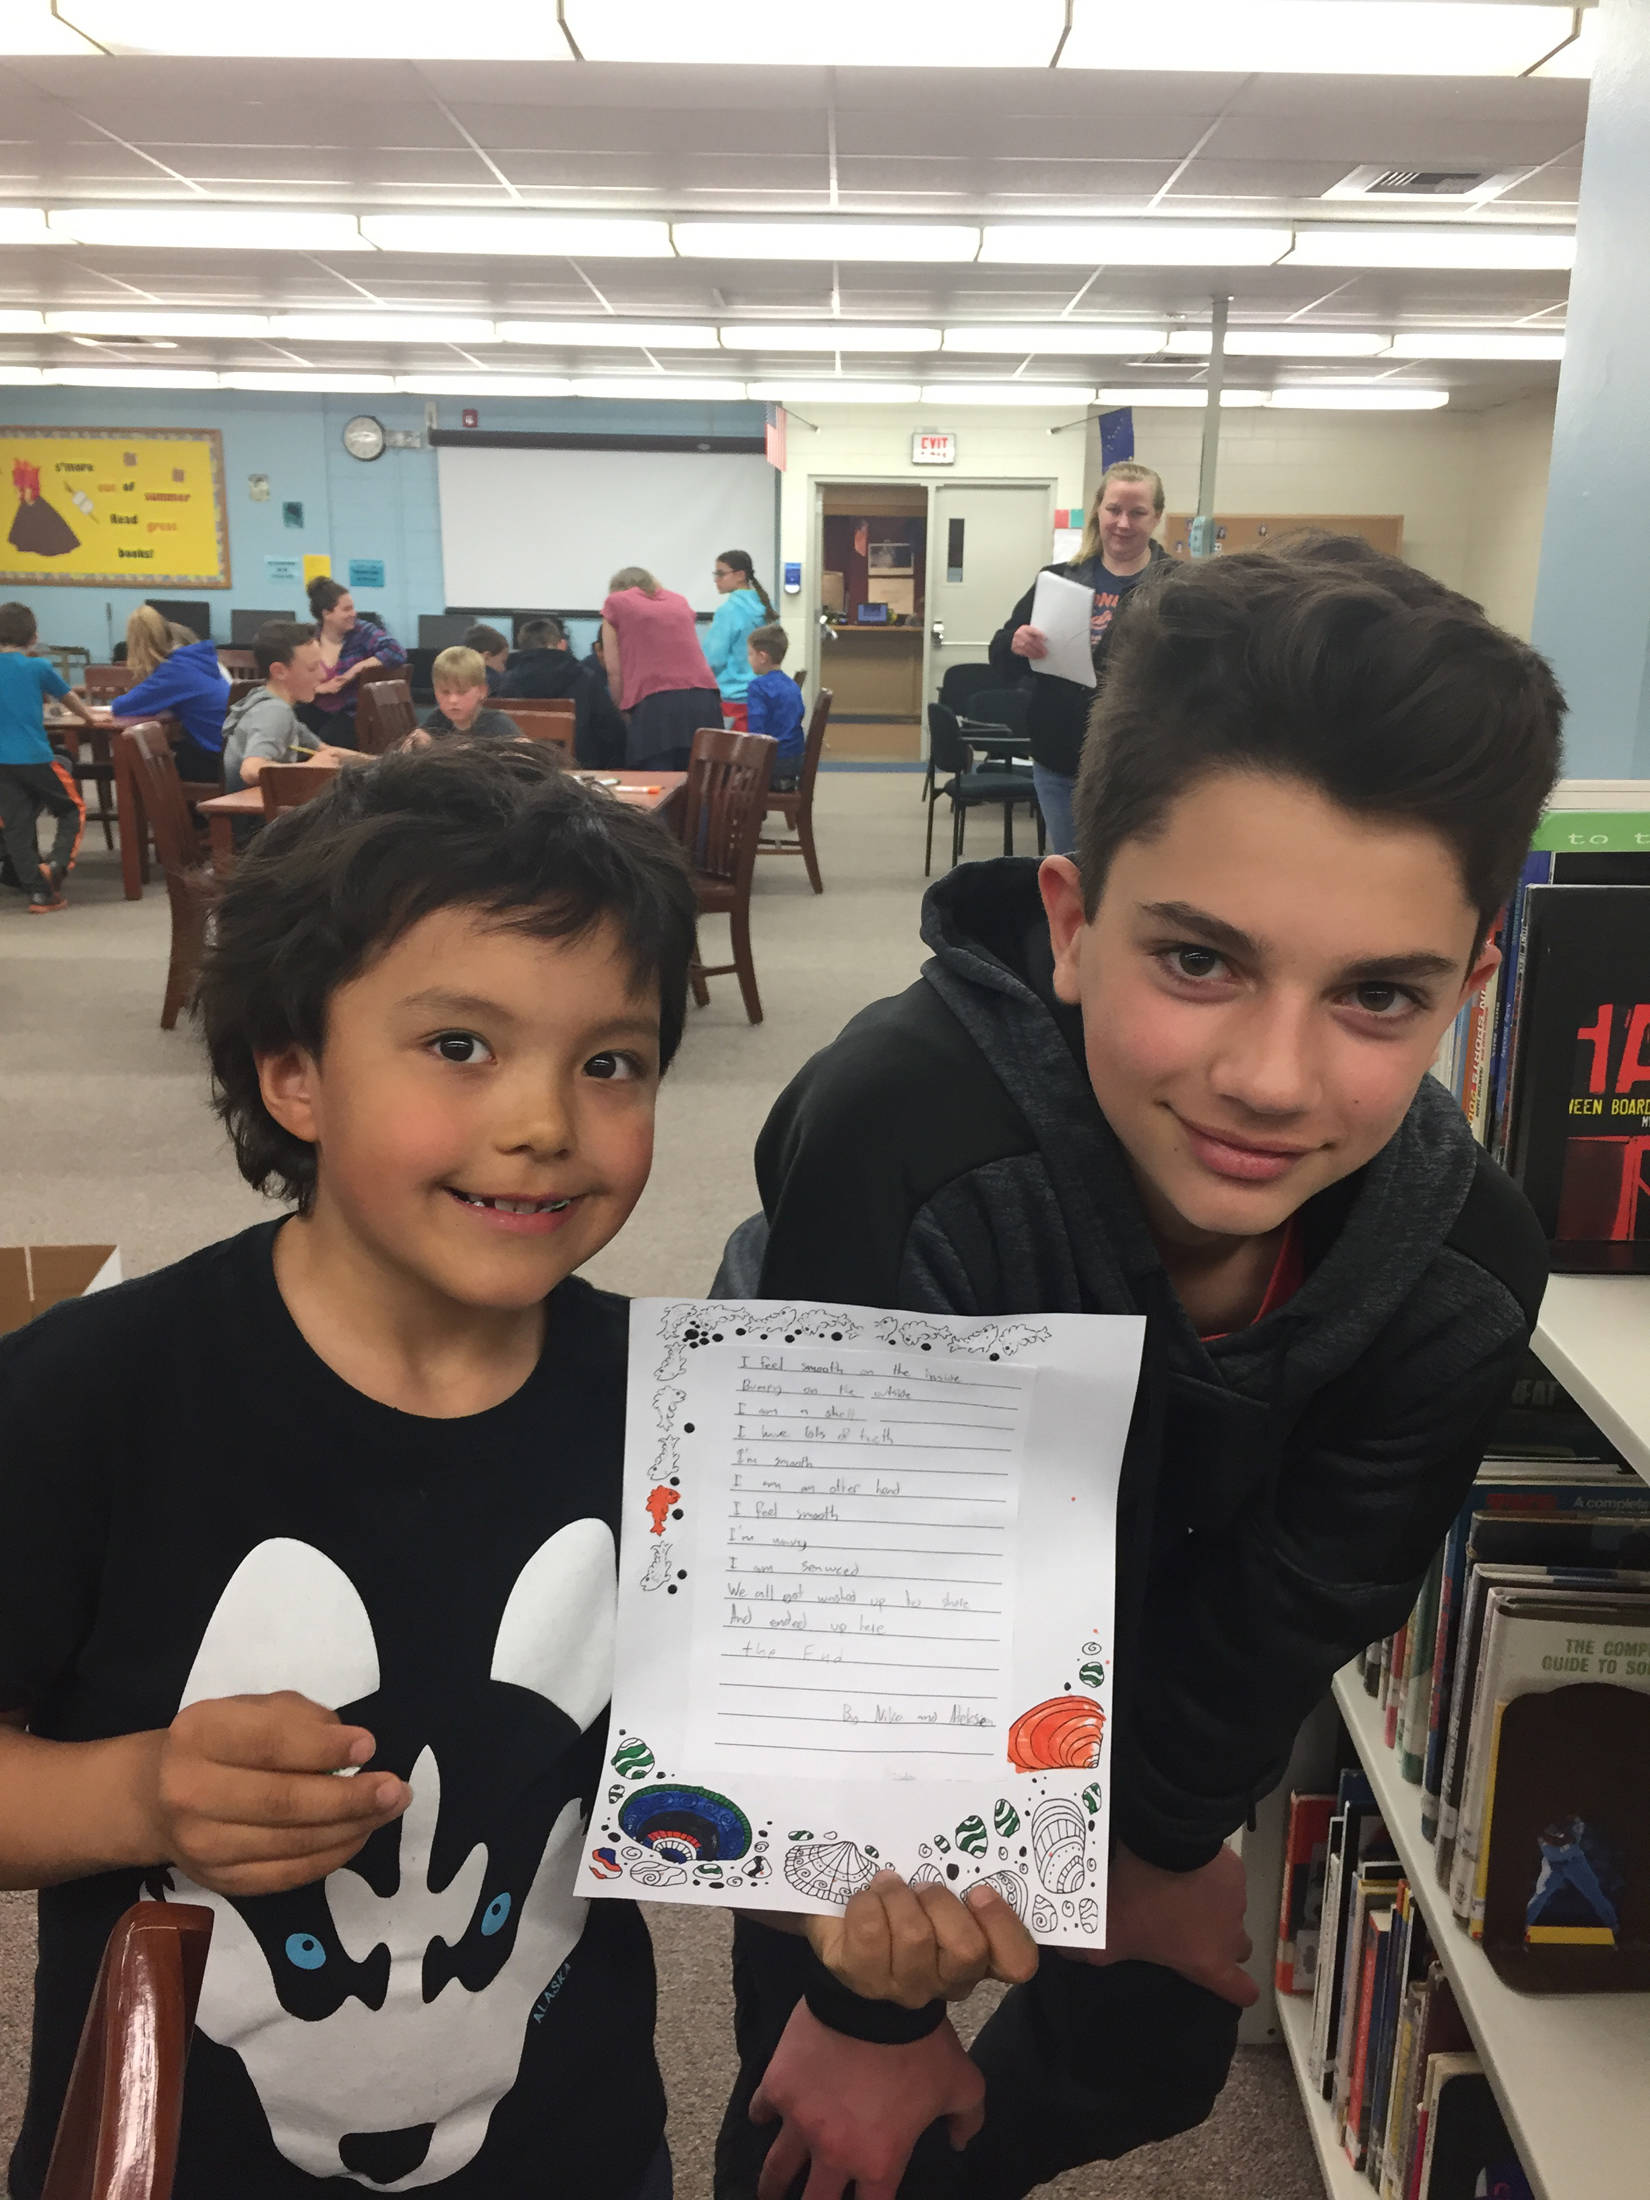 Niko Sulczynski (right) and his partner Aleksea Yatchmeneff (left) show off their finished poem during the last mentoring meeting between students from Paul Banks Elementary and Homer Middle School on Monday, May 14, 2018 at the middle school in Homer, Alaska. (Photo provided)